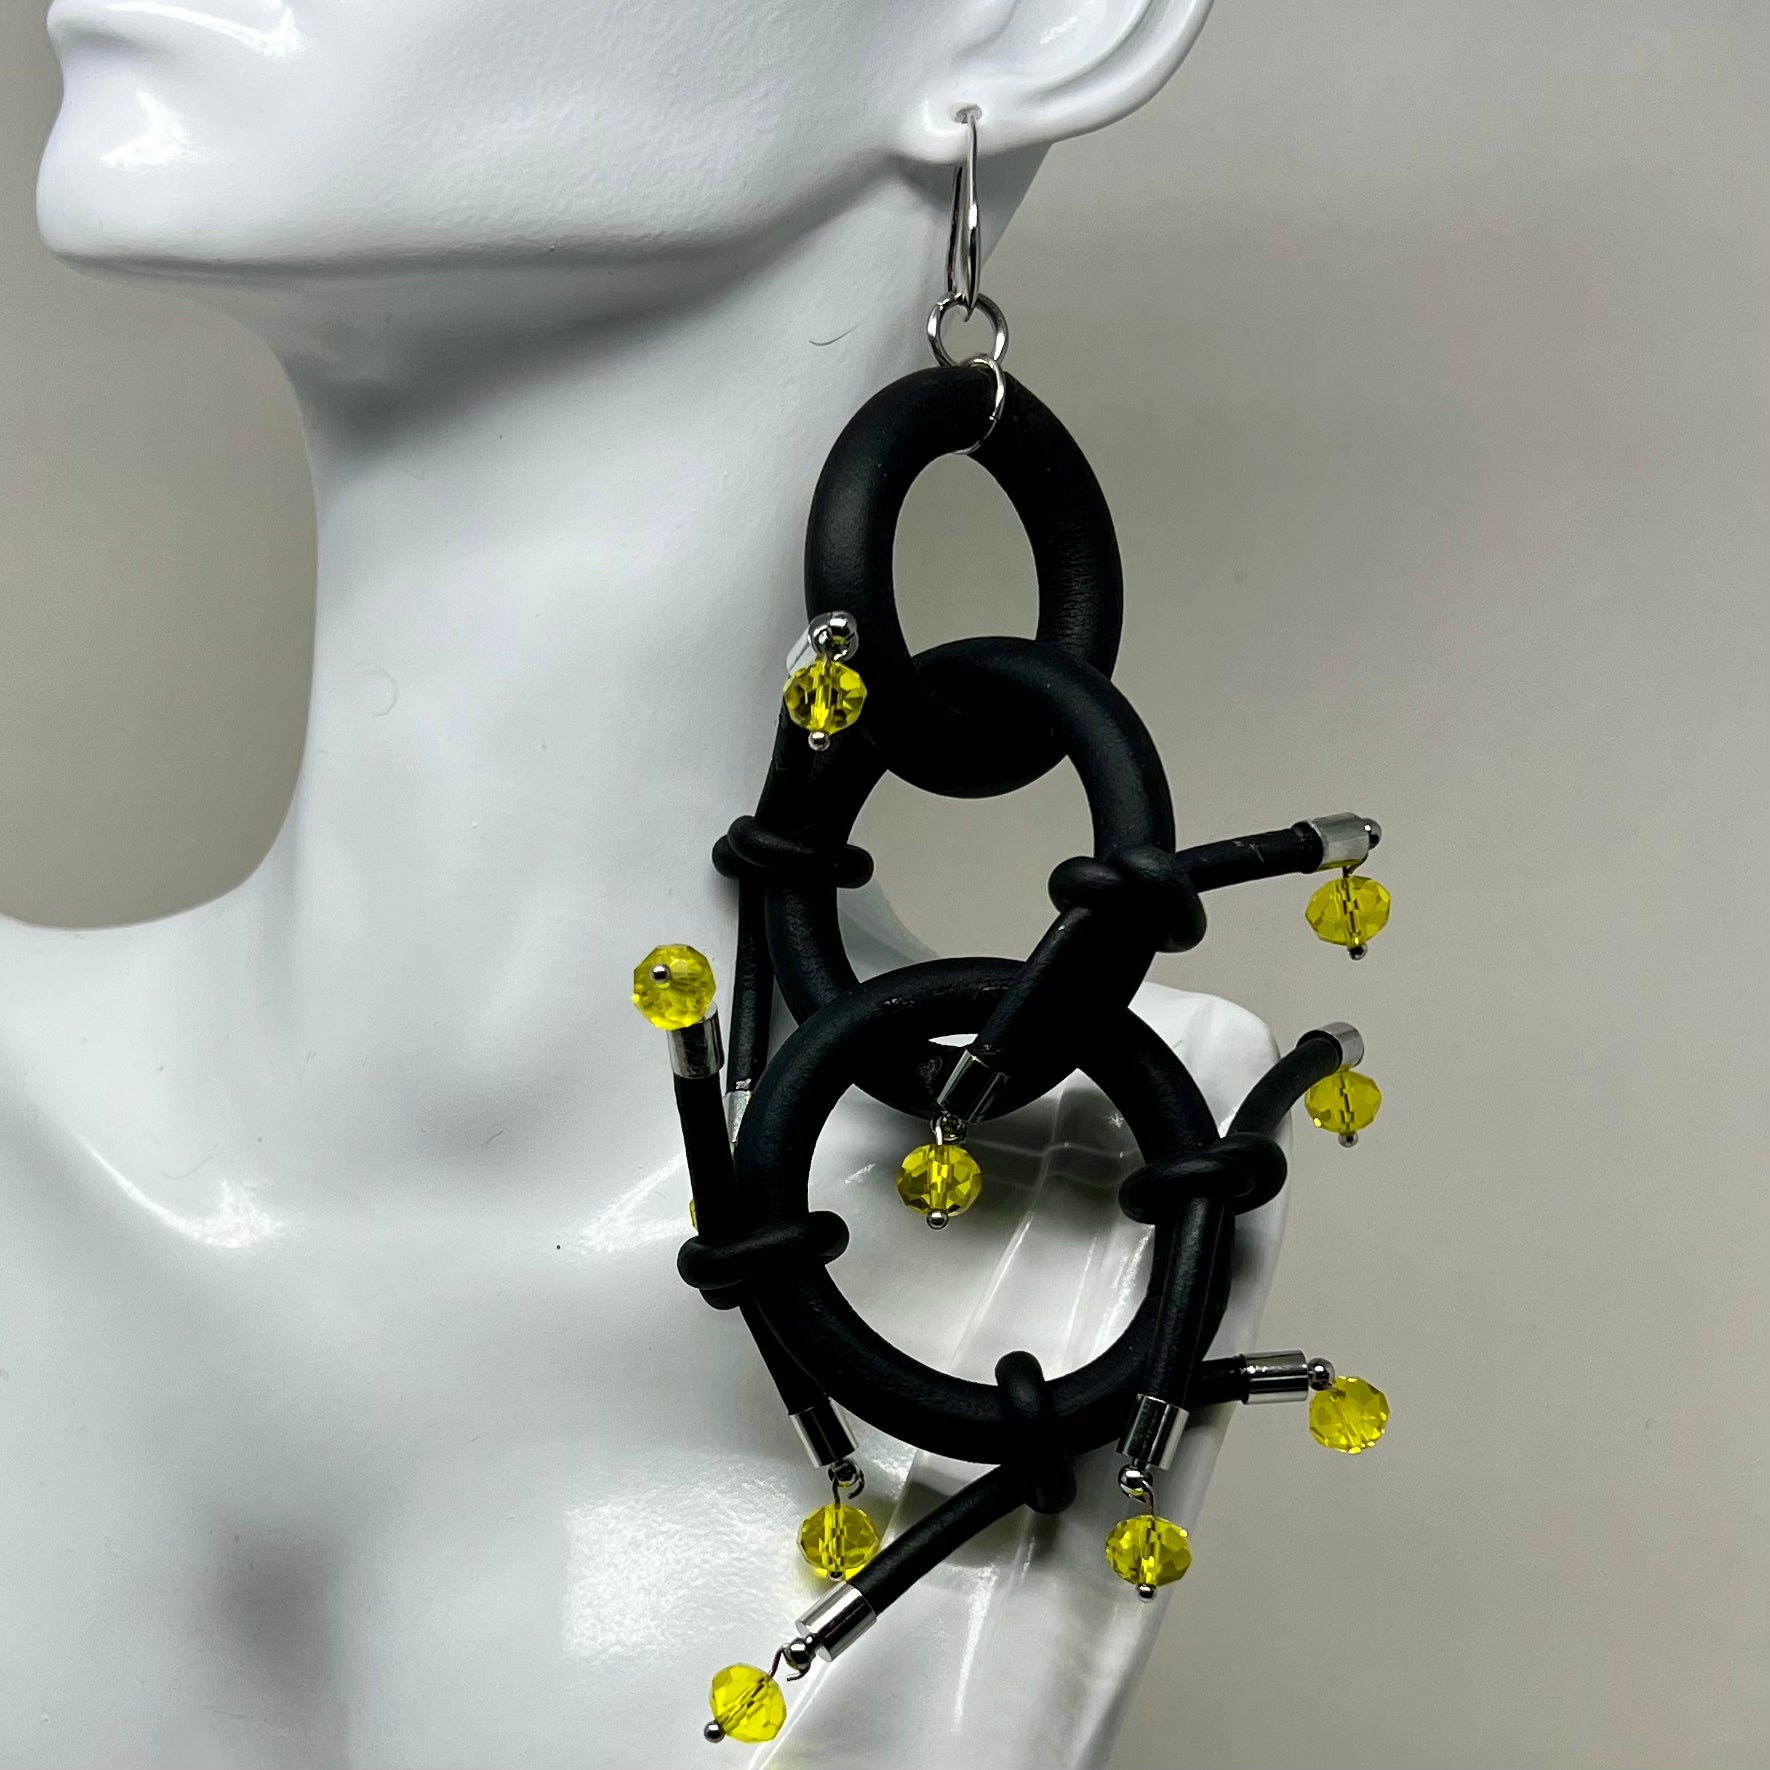 BLACK RUBBER EARRINGS WITH SILVER OR GOLD METAL PARTS AND GLASS BEADS. by nyet jewelry